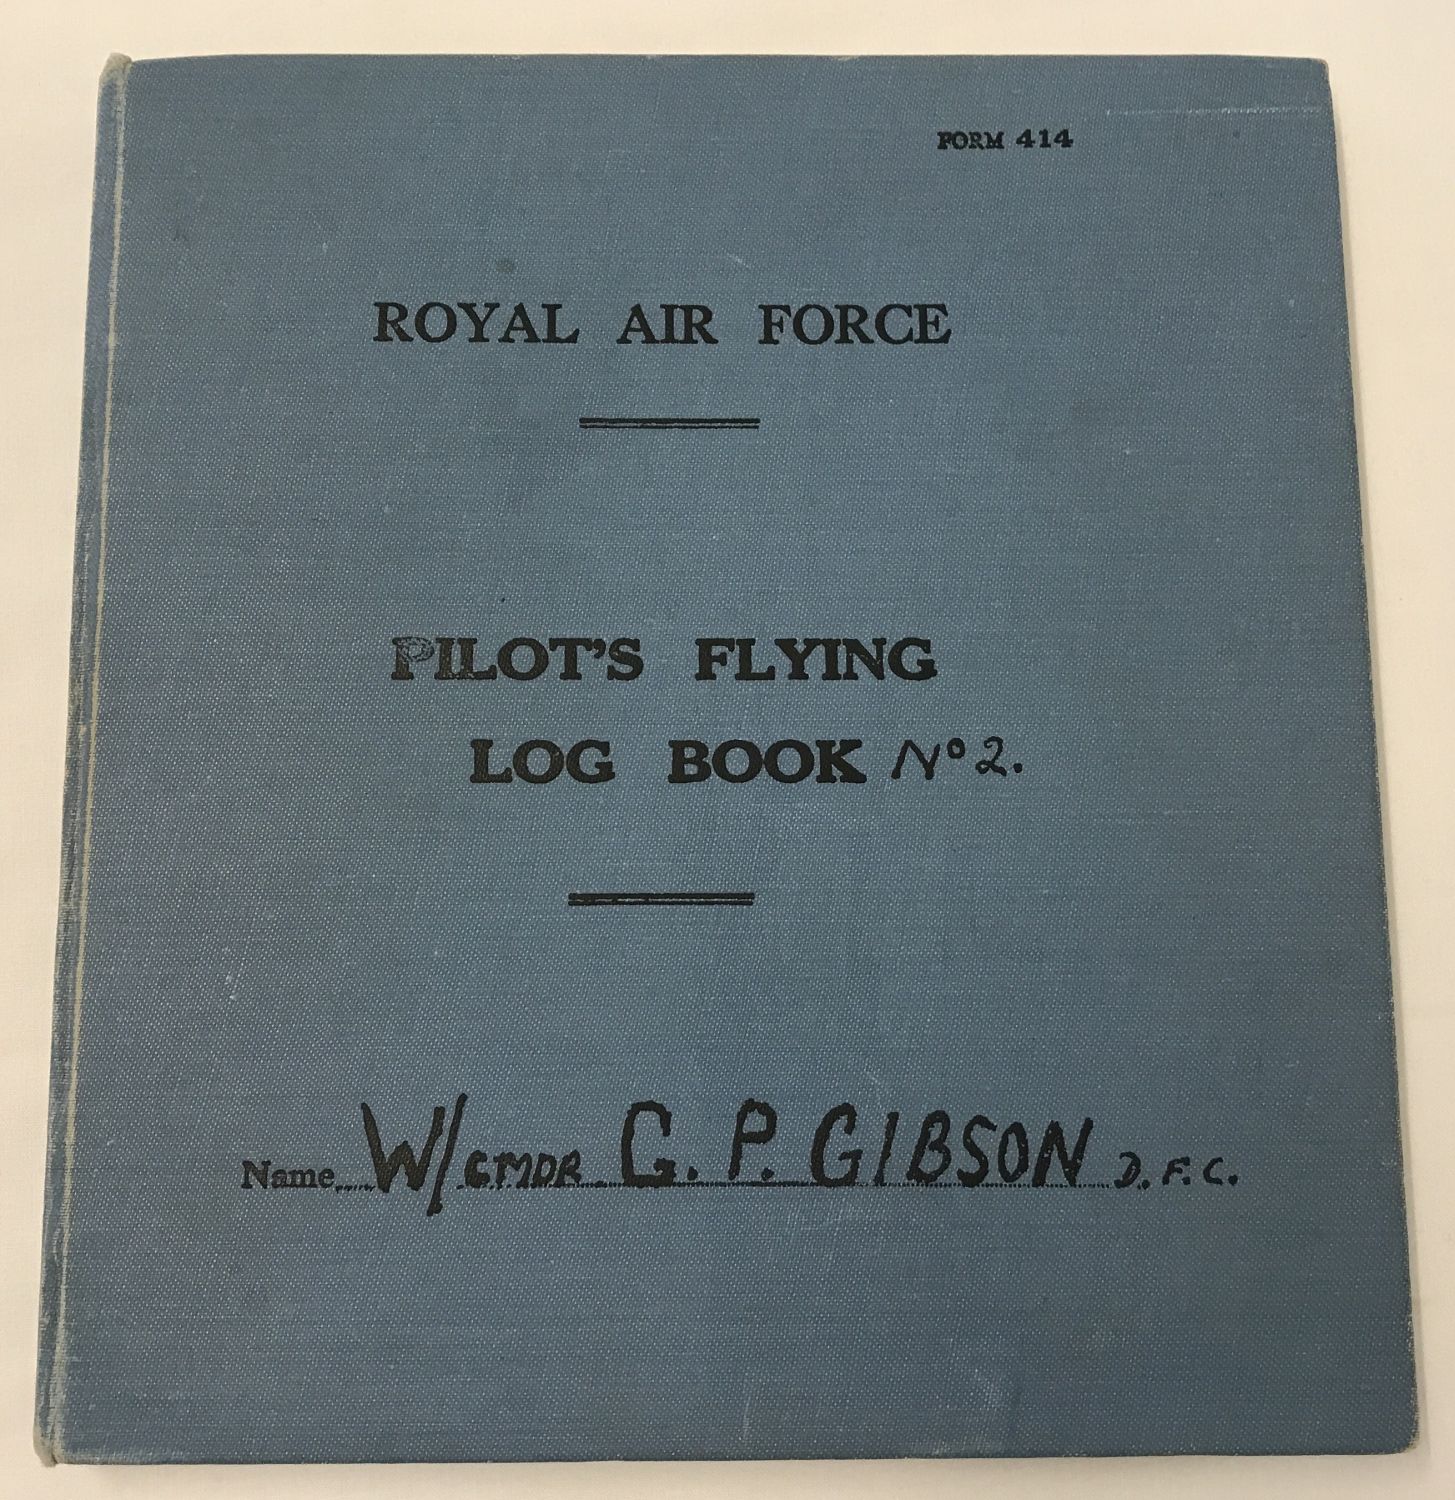 WWII W/Cmdr Guy Gibson - hardback copy of Pilot's Flying Log Book No.2.